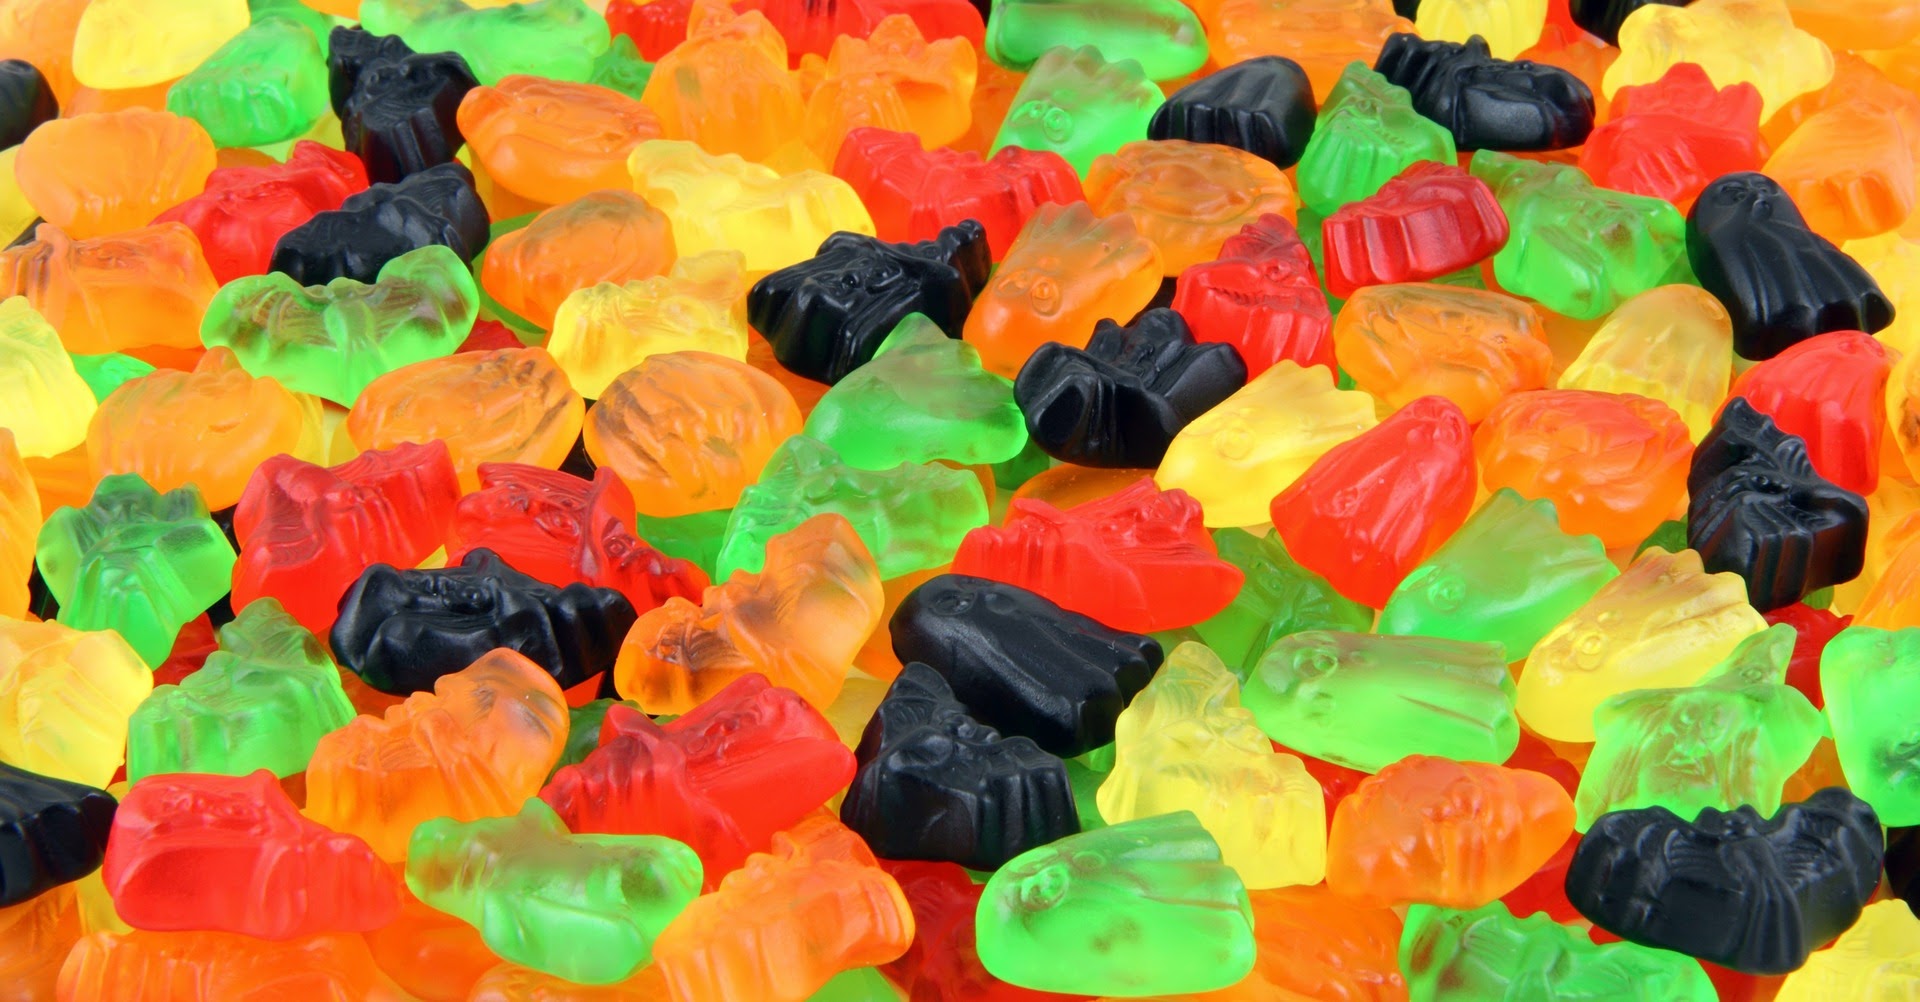 Best HHC Gummies: Top 5 Brands For Potent Effects In 2023